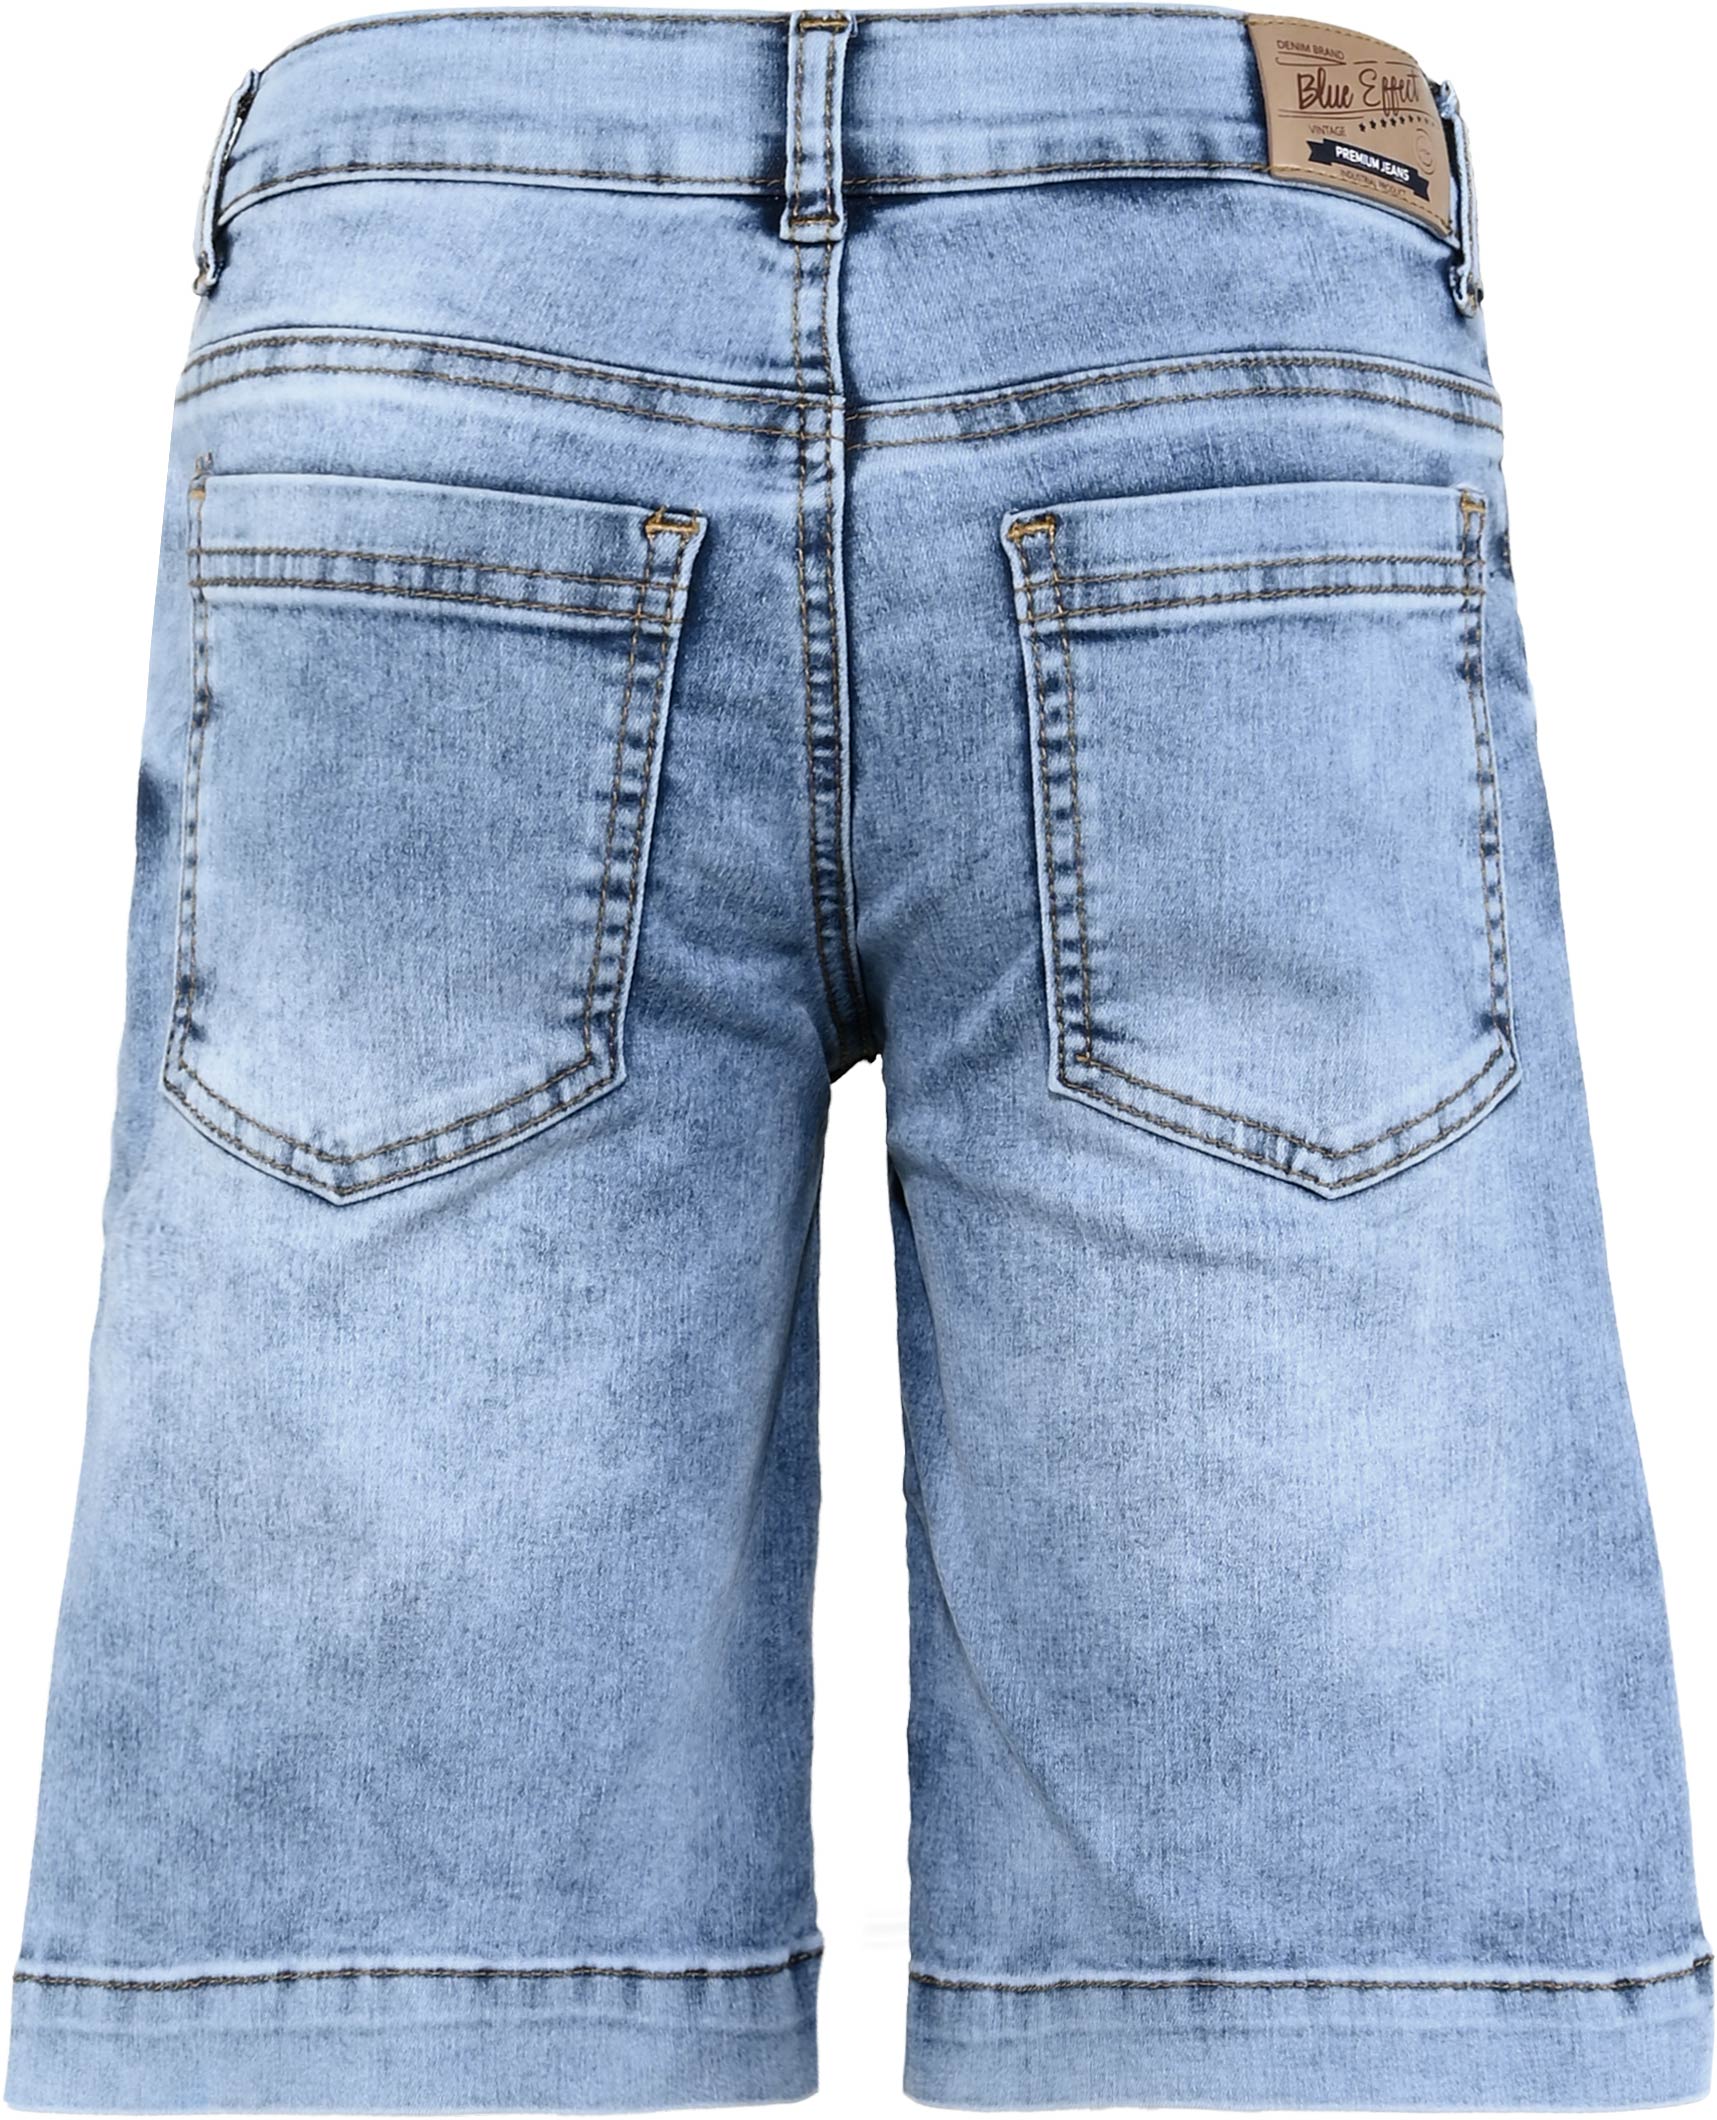 4853-Boys Jean Short Relaxed Fit, available in Normal